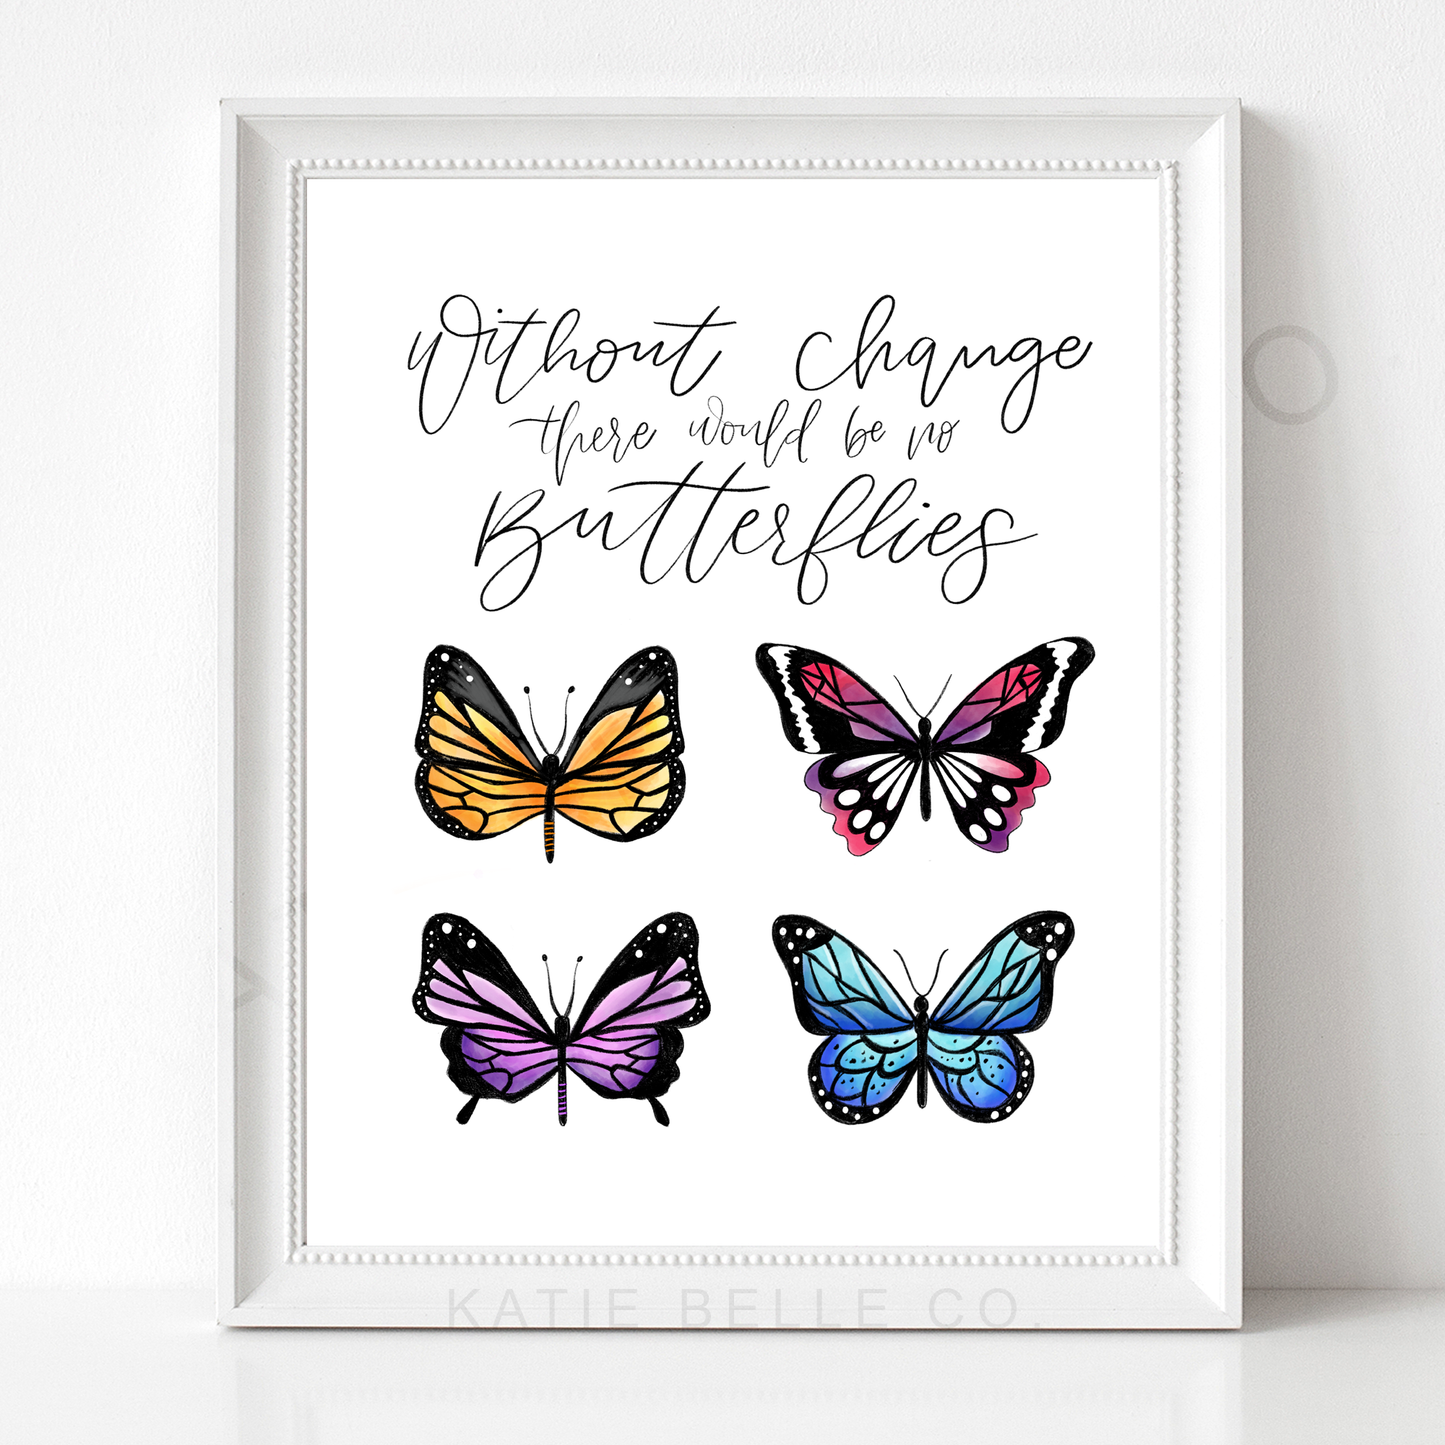 Butterfly Positive Motivational Art, Uplifting Quote